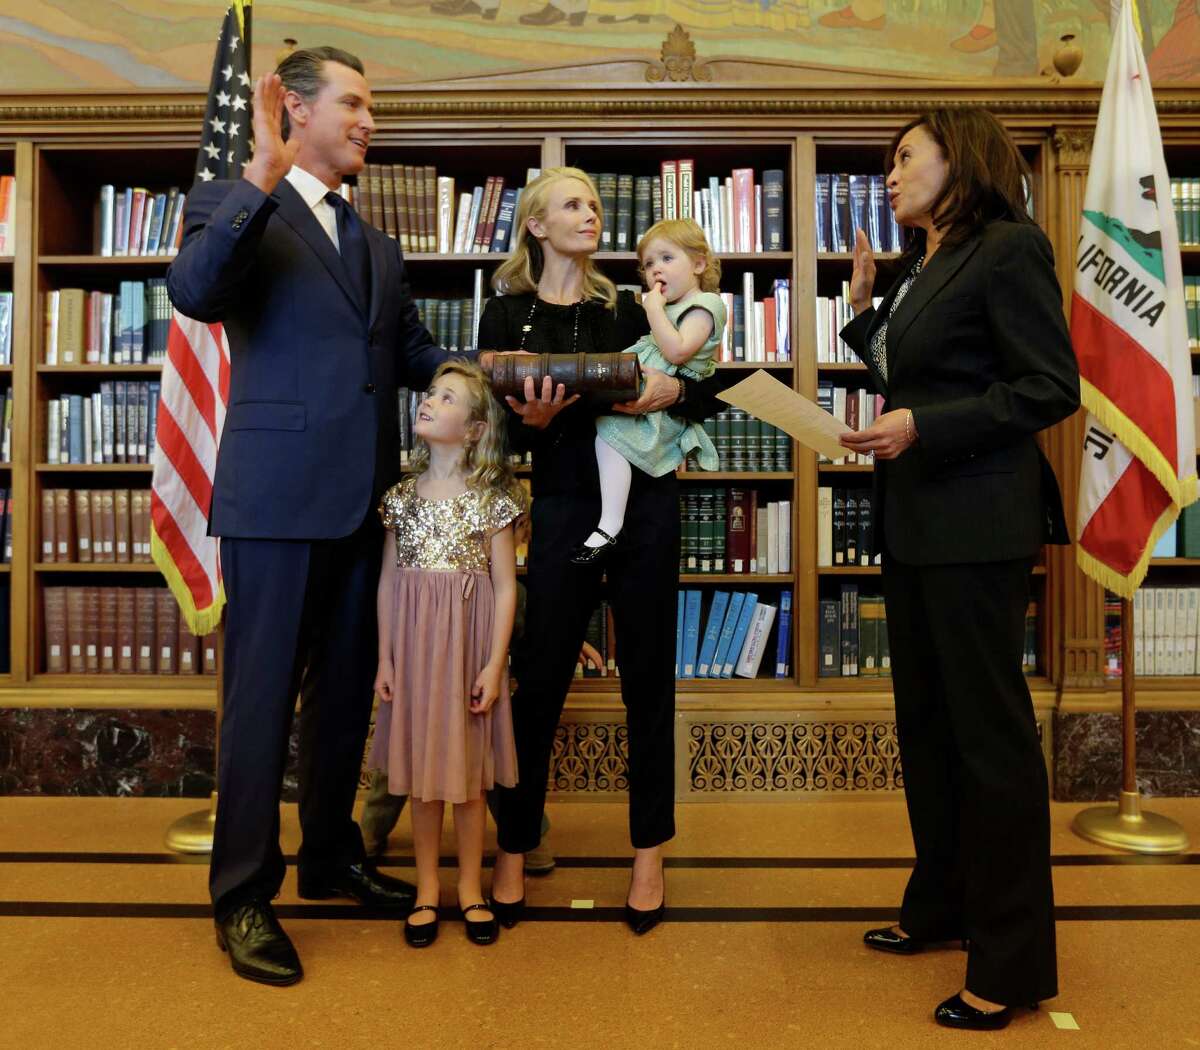 Montana Newsom, 5, second from left, looks up at her father, Lt. Gov. Gavin Newsom, as he takes the oath of office from Attorney General Kamala Harris, right, during an inauguration ceremony in Sacramento, Calif., Monday, Jan. 5, 2015. Along with Montana, Newsom was accompanied by his wife, Jennifer, and daughter Brooklynn,1.